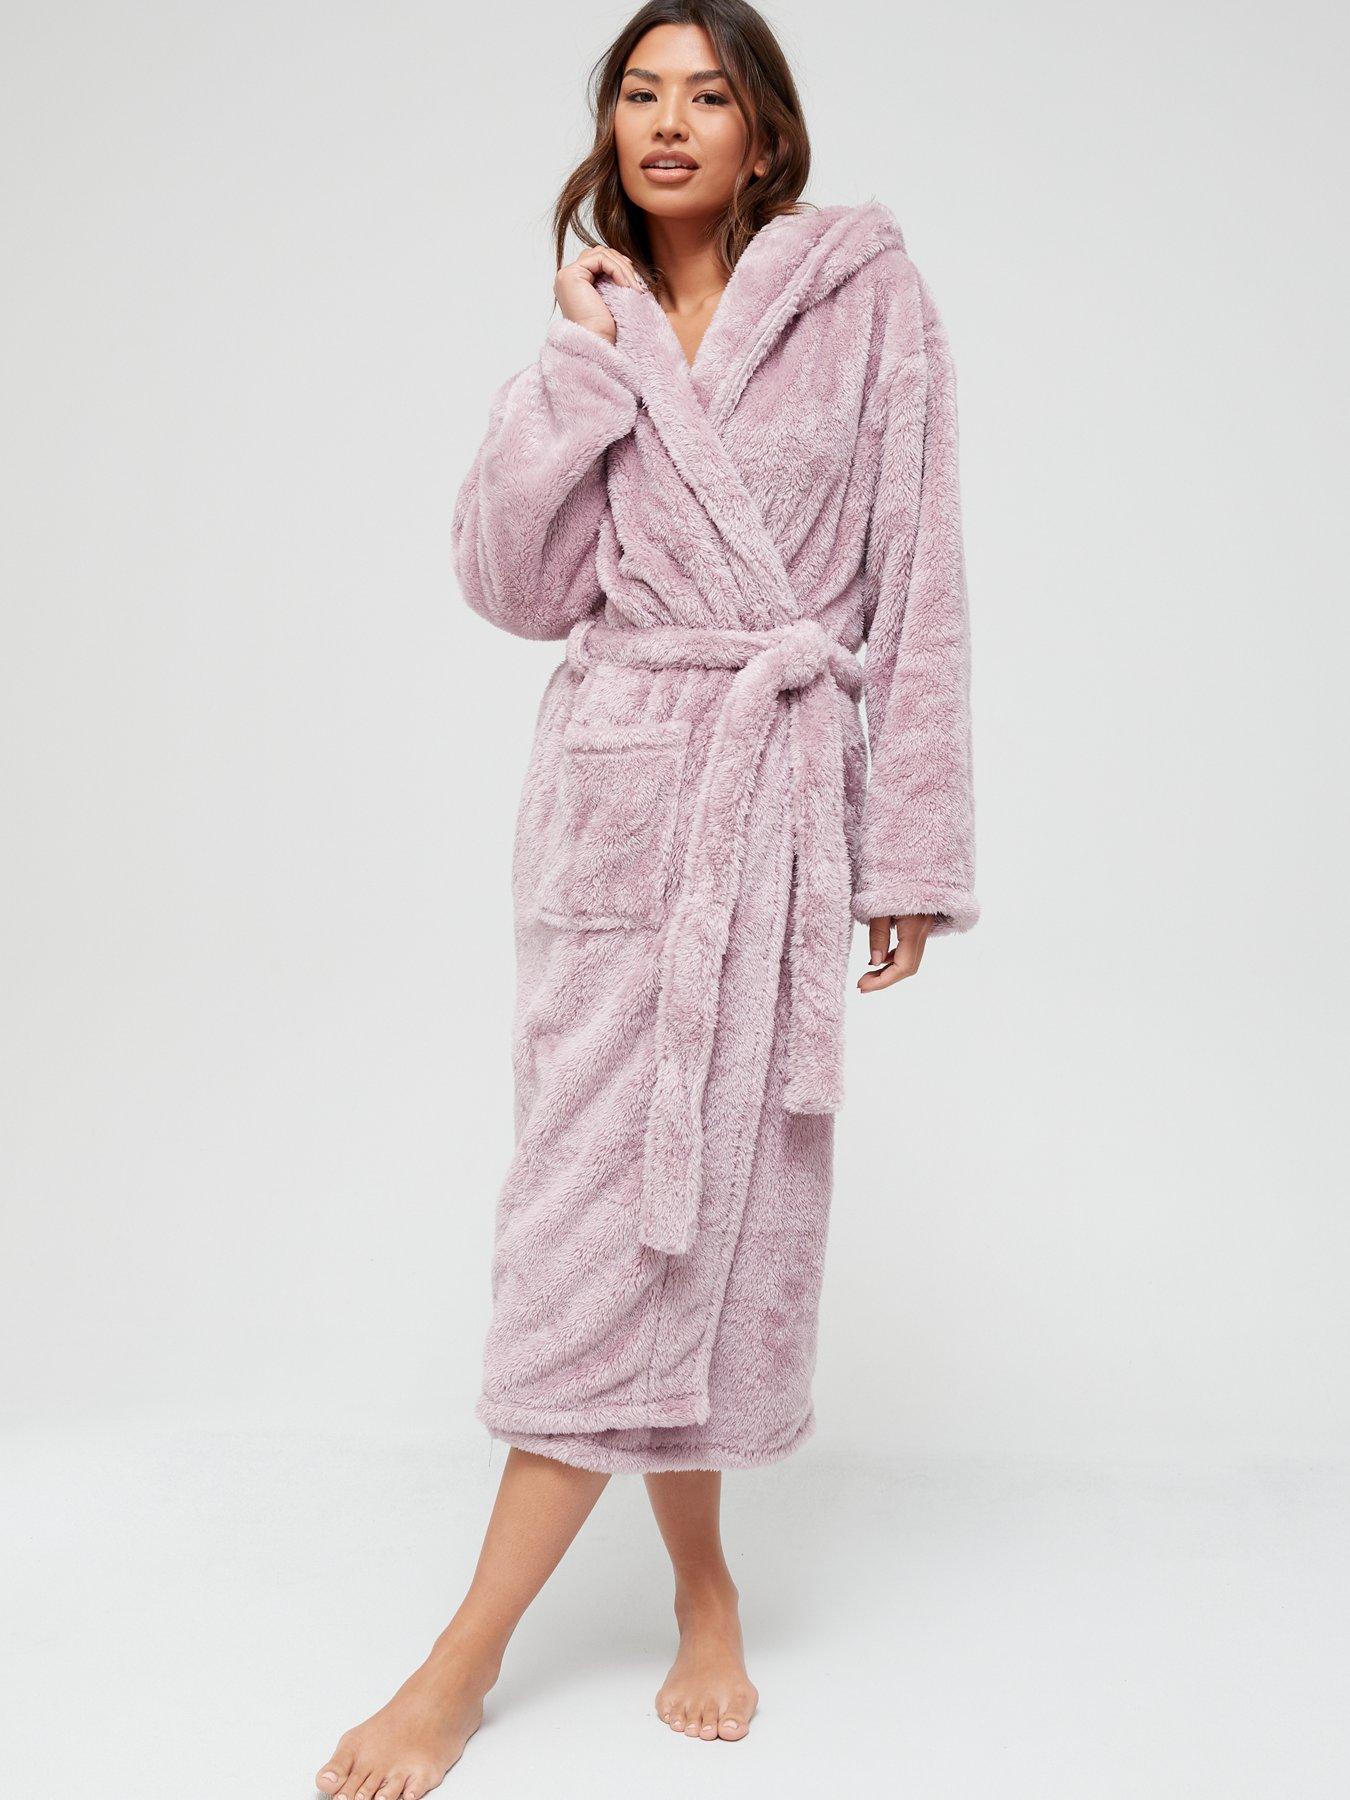 Details about   Super Soft Embossed Fleece Zip Front Dressing Gown Robe Size S M L XL XXL 